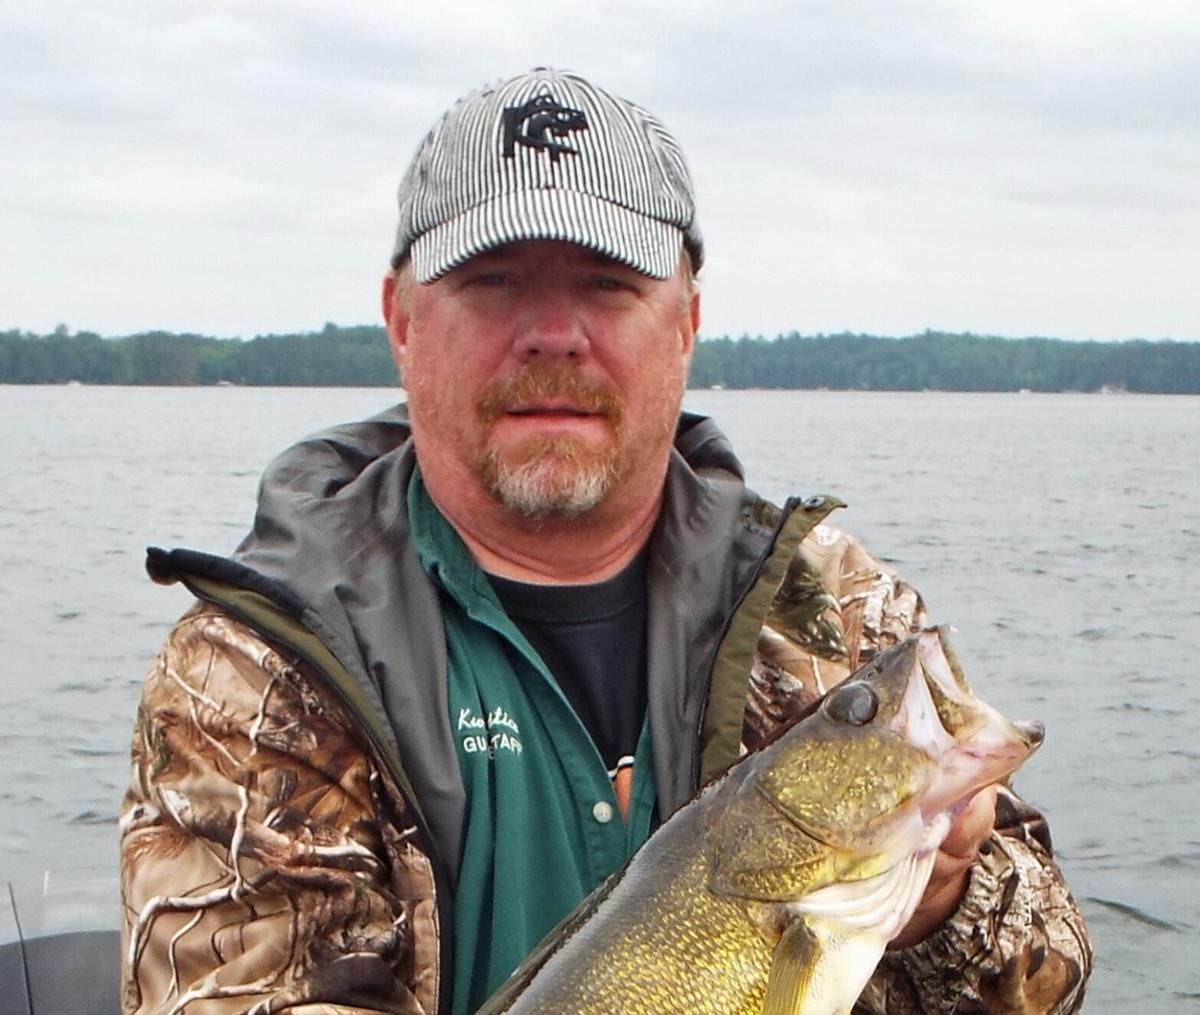 Where have all the walleye gone? Before long, anglers may have to make do  with bluegills